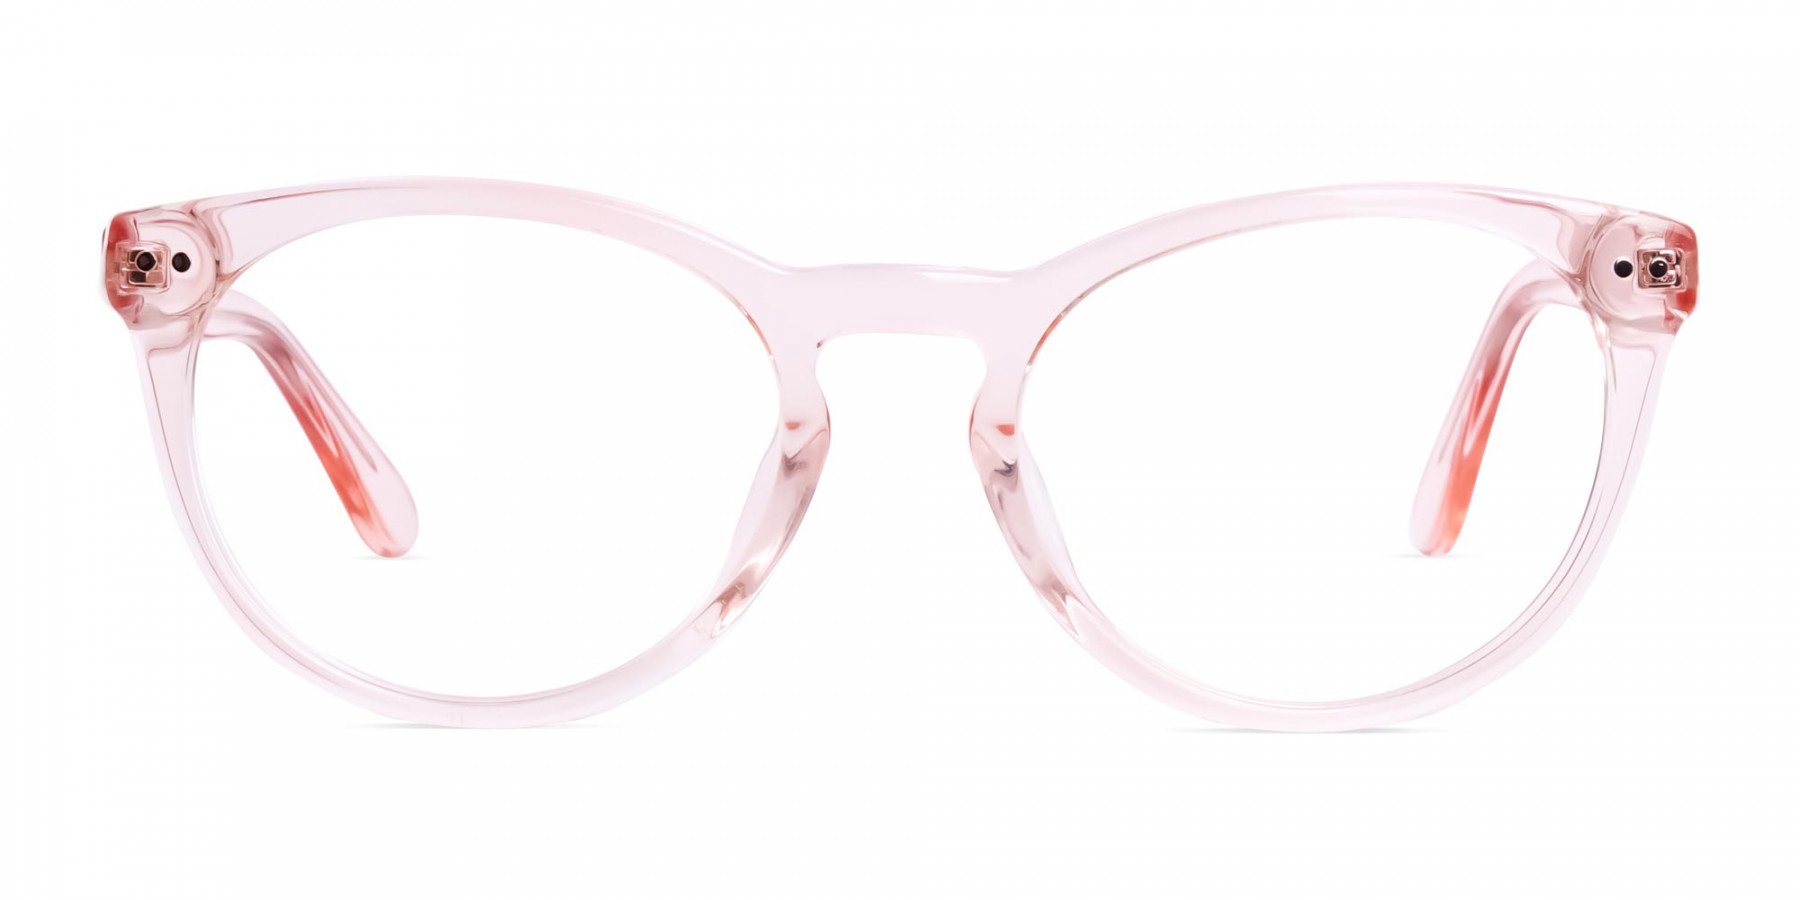 crytal-clear-or-transparent-nude-and-hot-pink-full-rim-glasses-frames-1